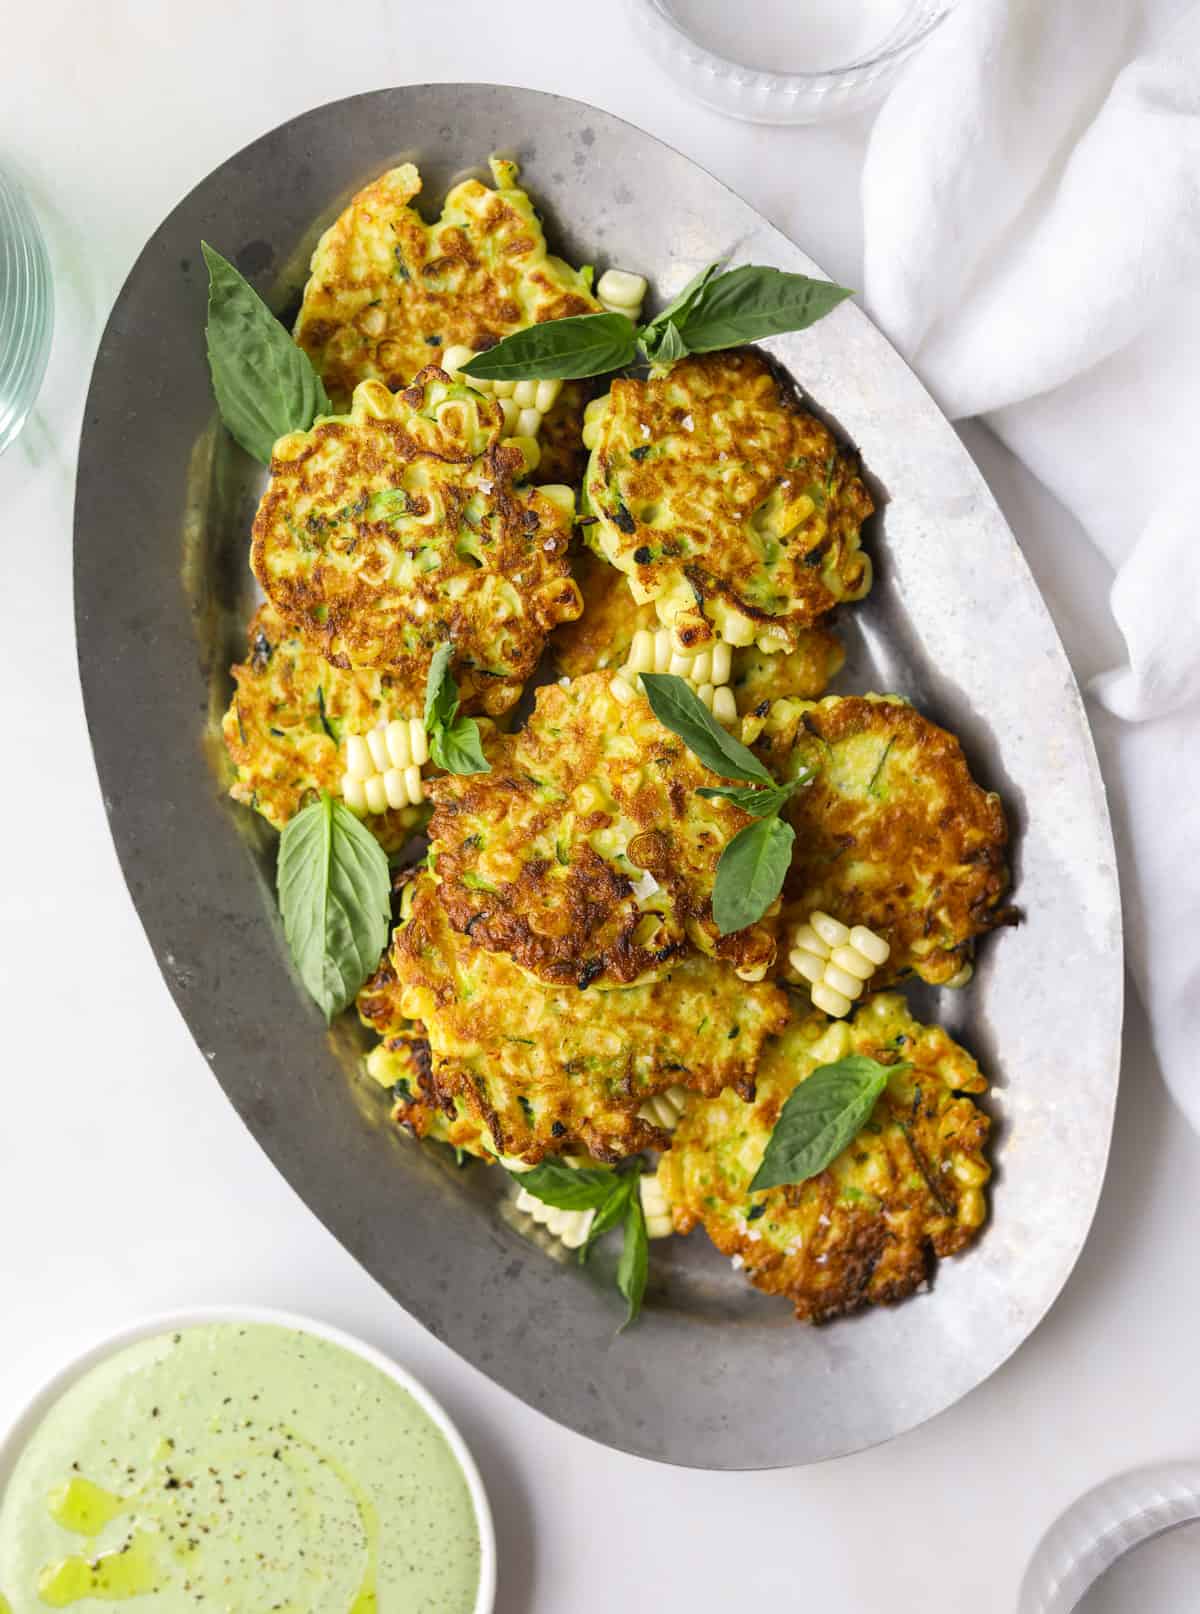 Corn and Zucchini Fritters with Green Goddess Dip